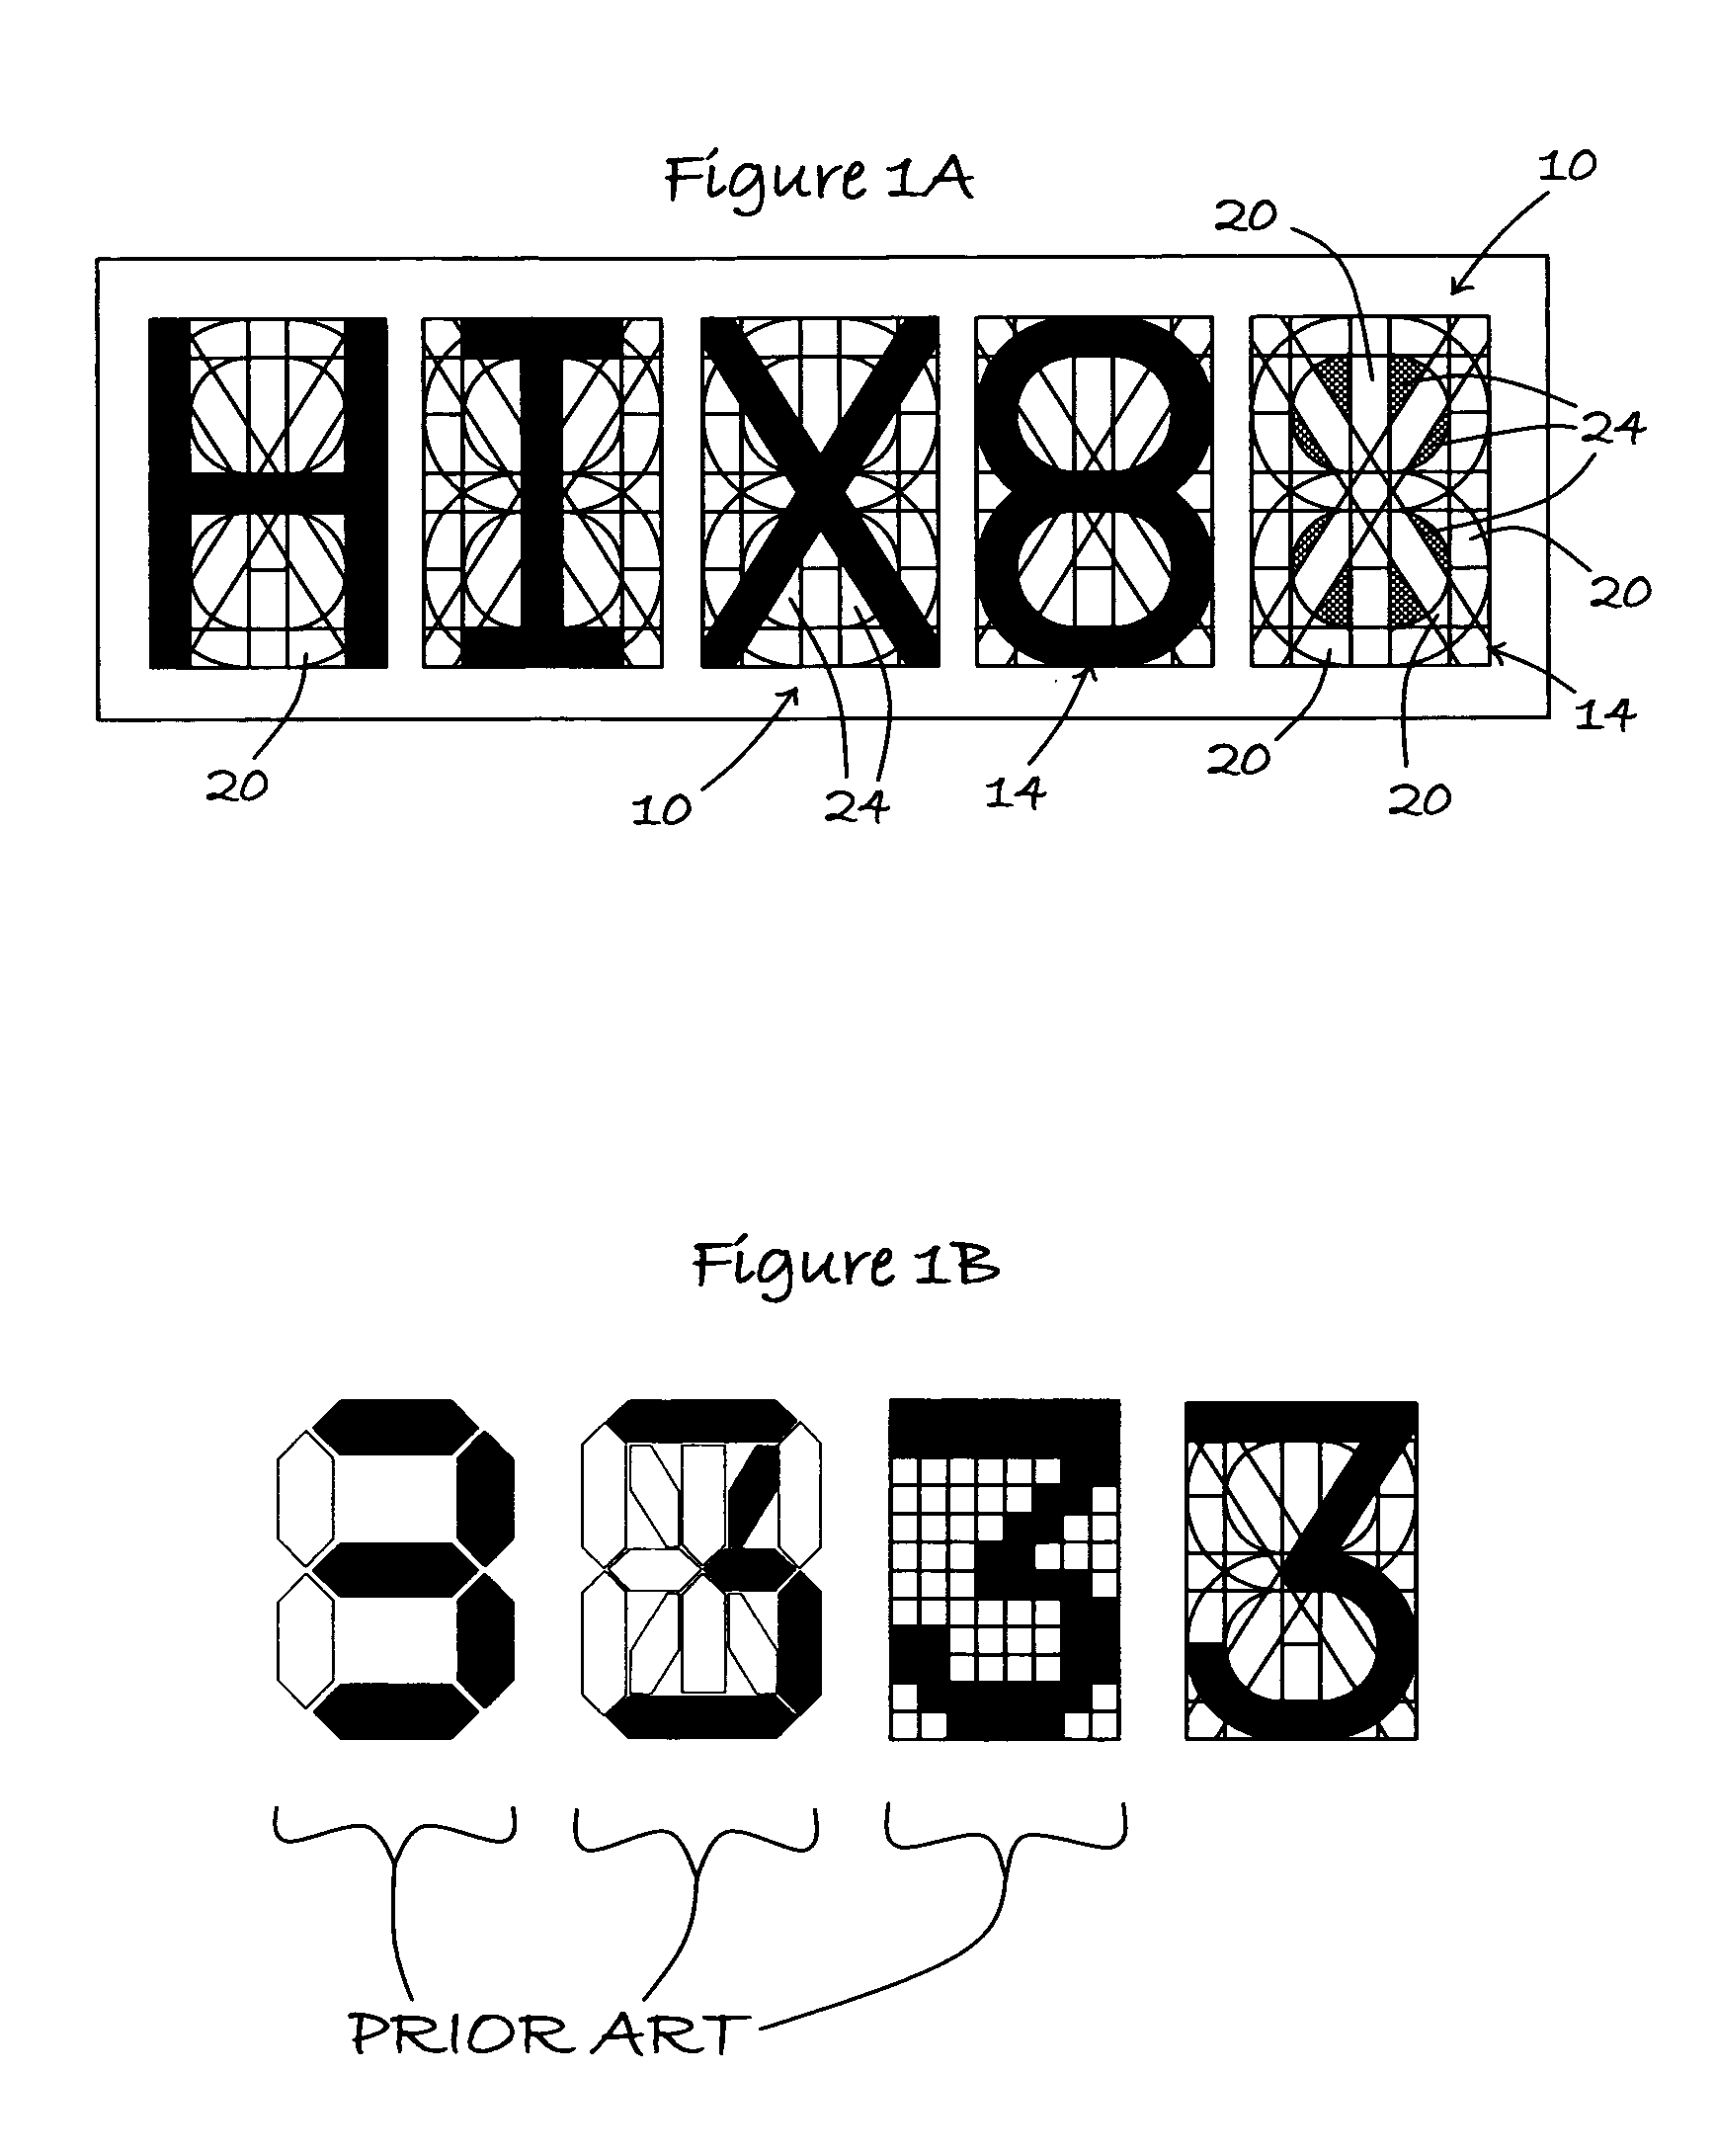 High resolution, low segmentation alphanumeric display for electronic devices